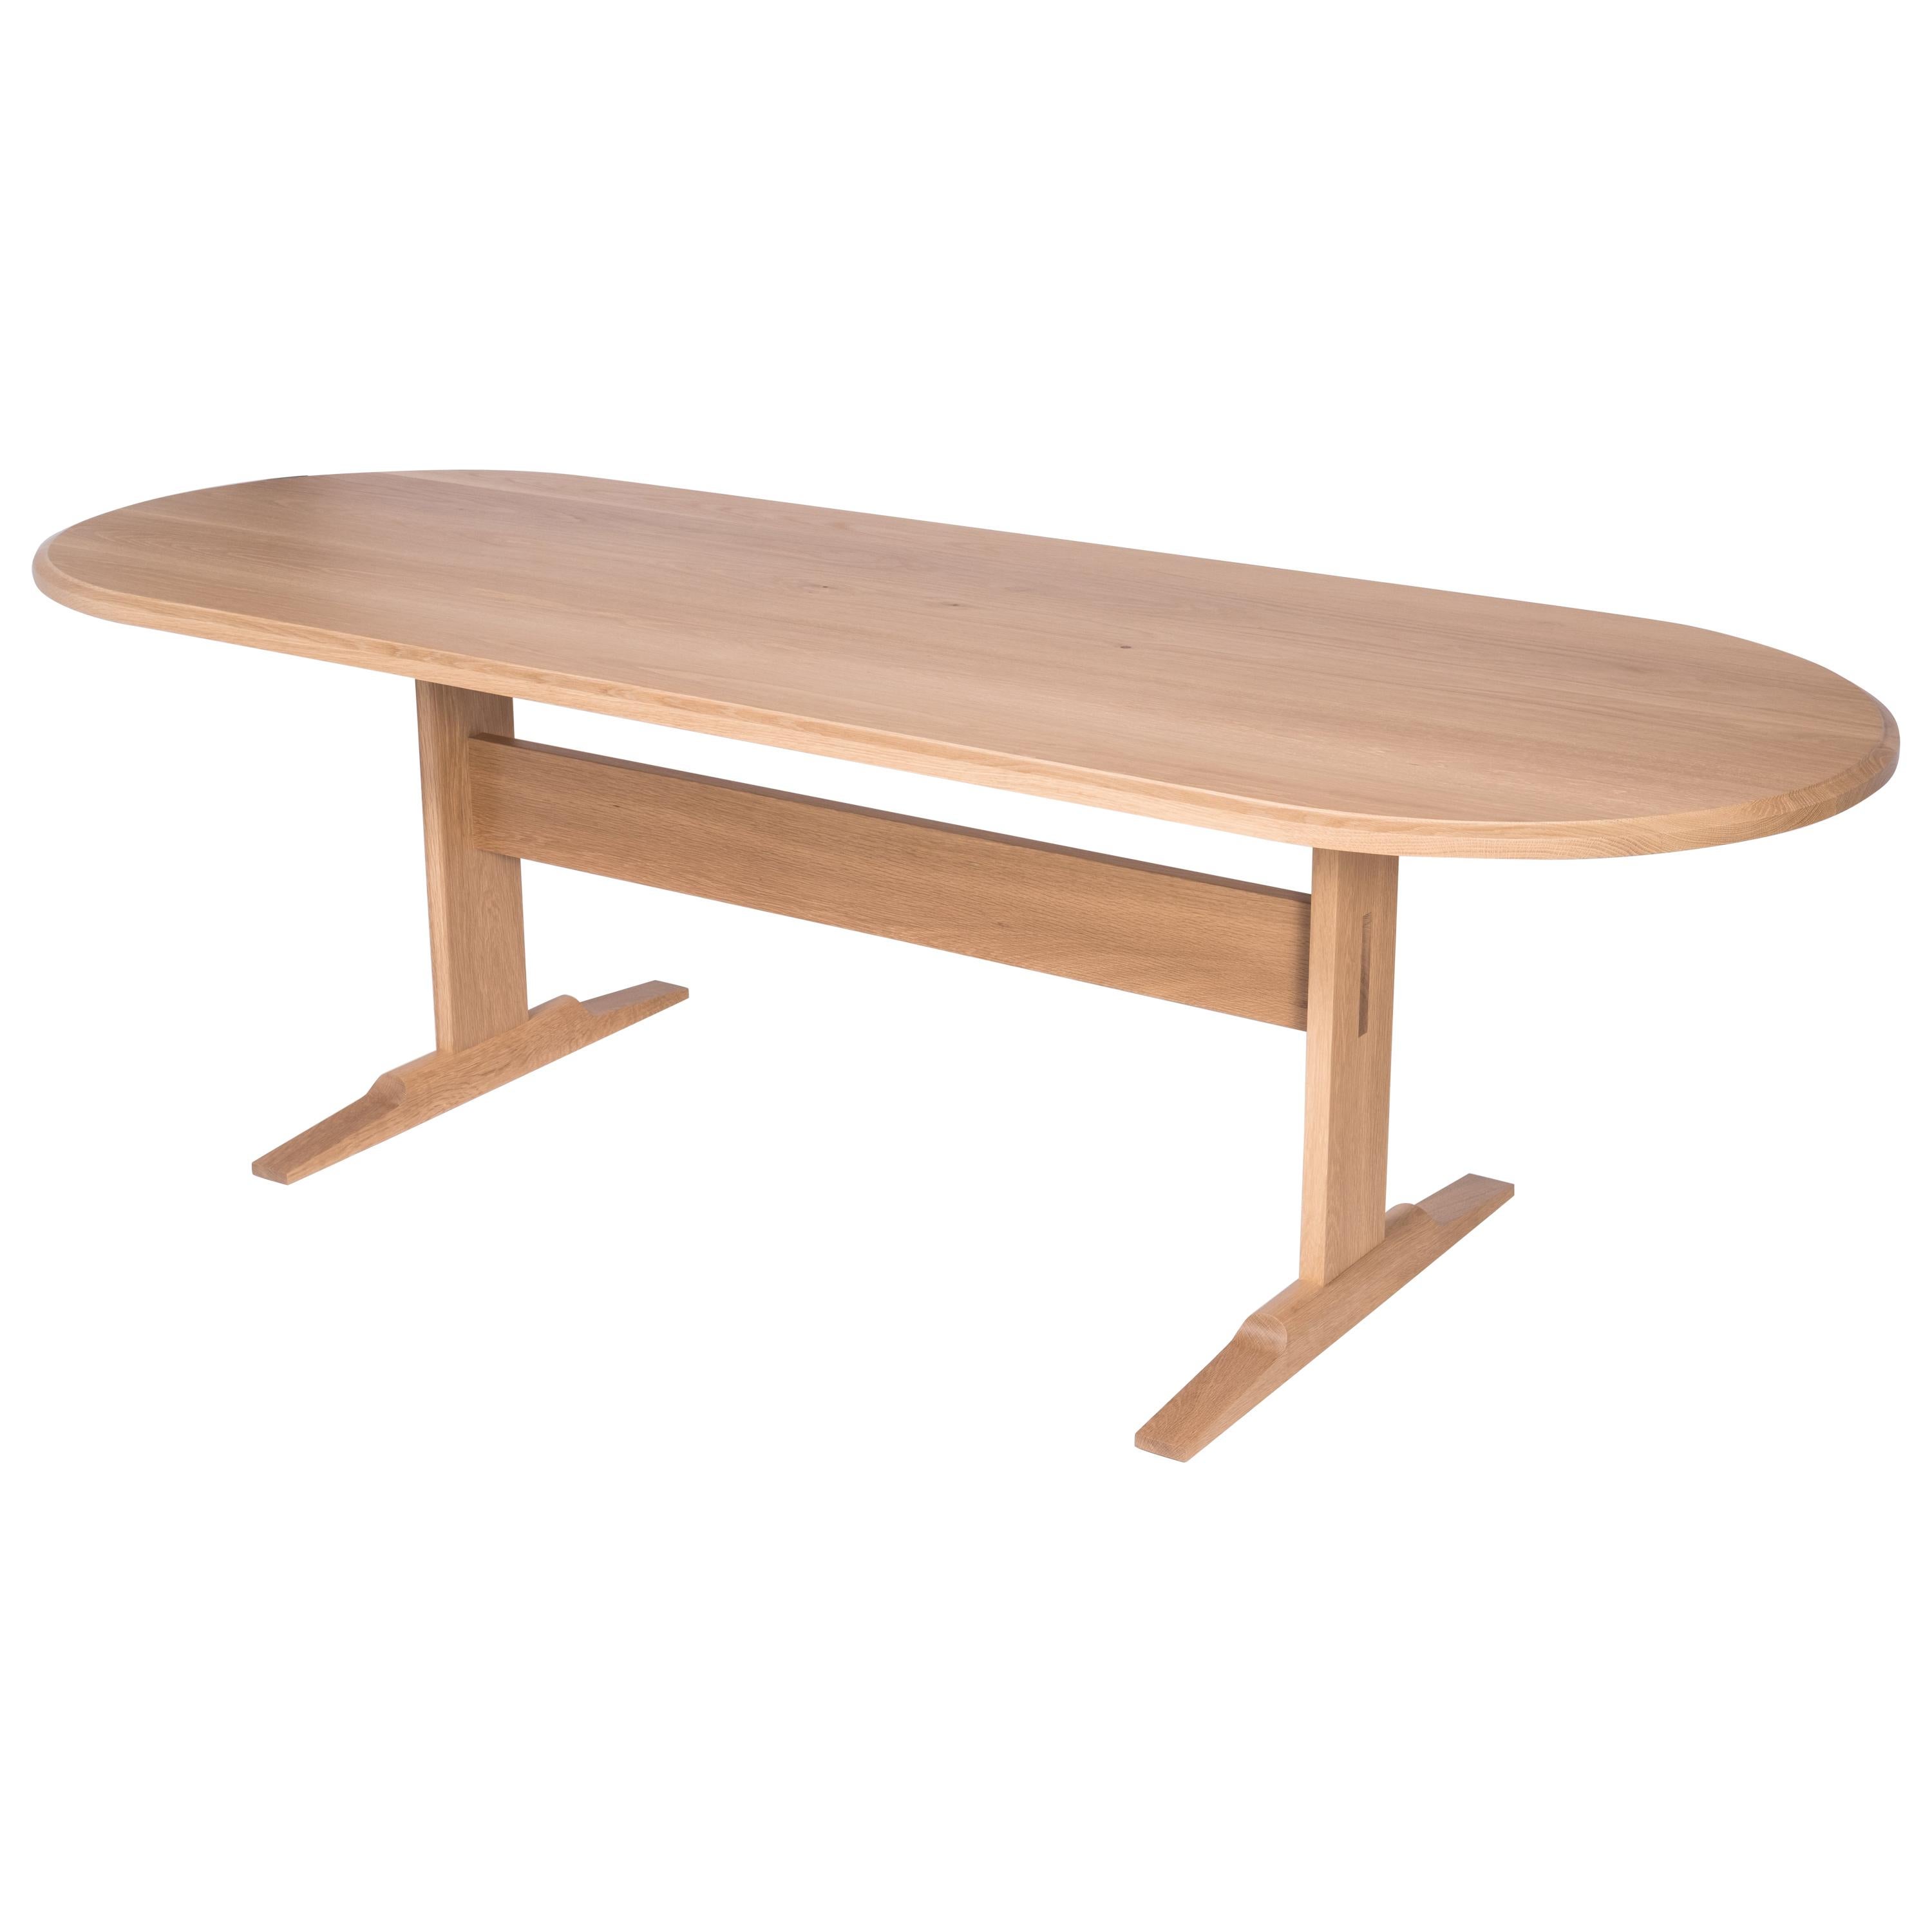 Spade Dining Table by Tretiak Works, Modern Contemporary White Oak Trestle For Sale